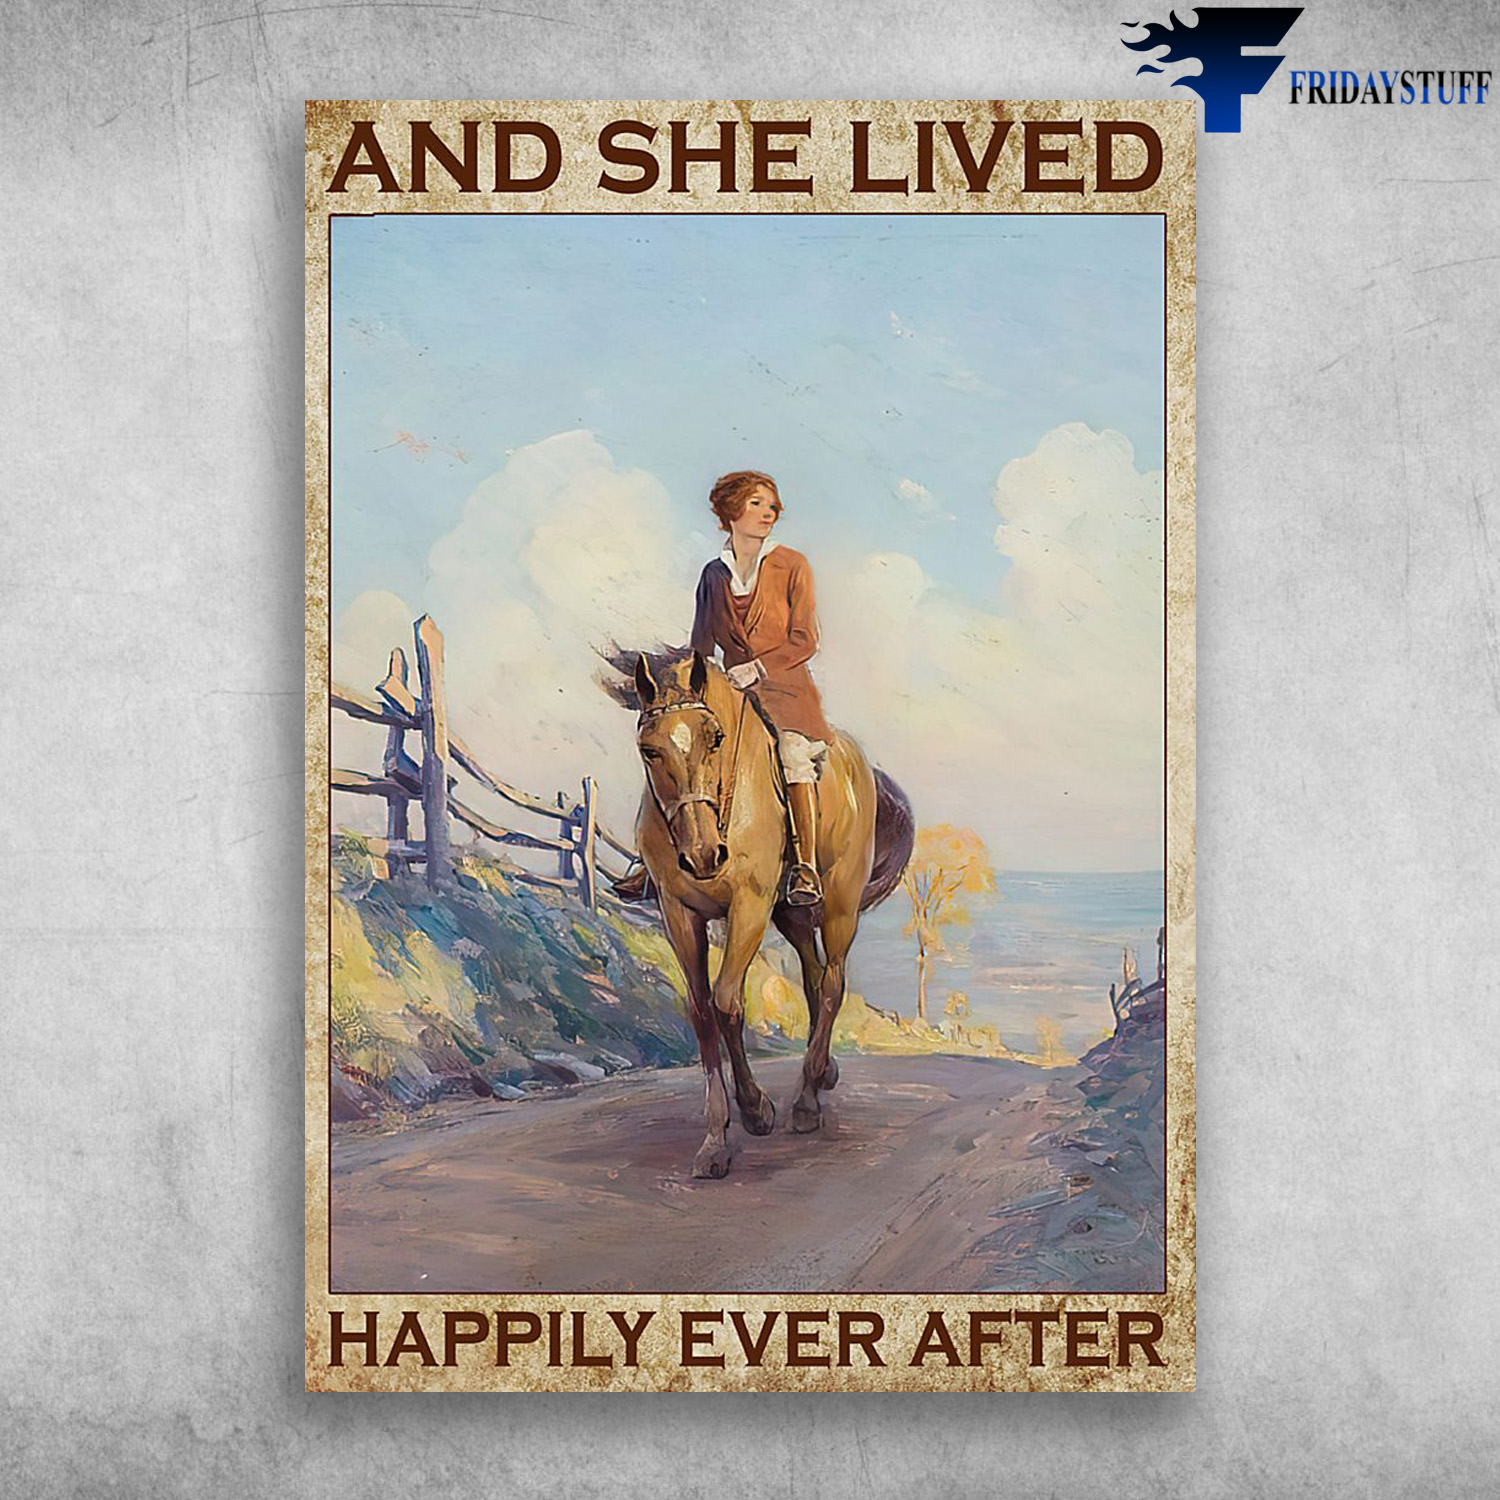 The Girl Riding Horse - And She Lived, Happy Ever After